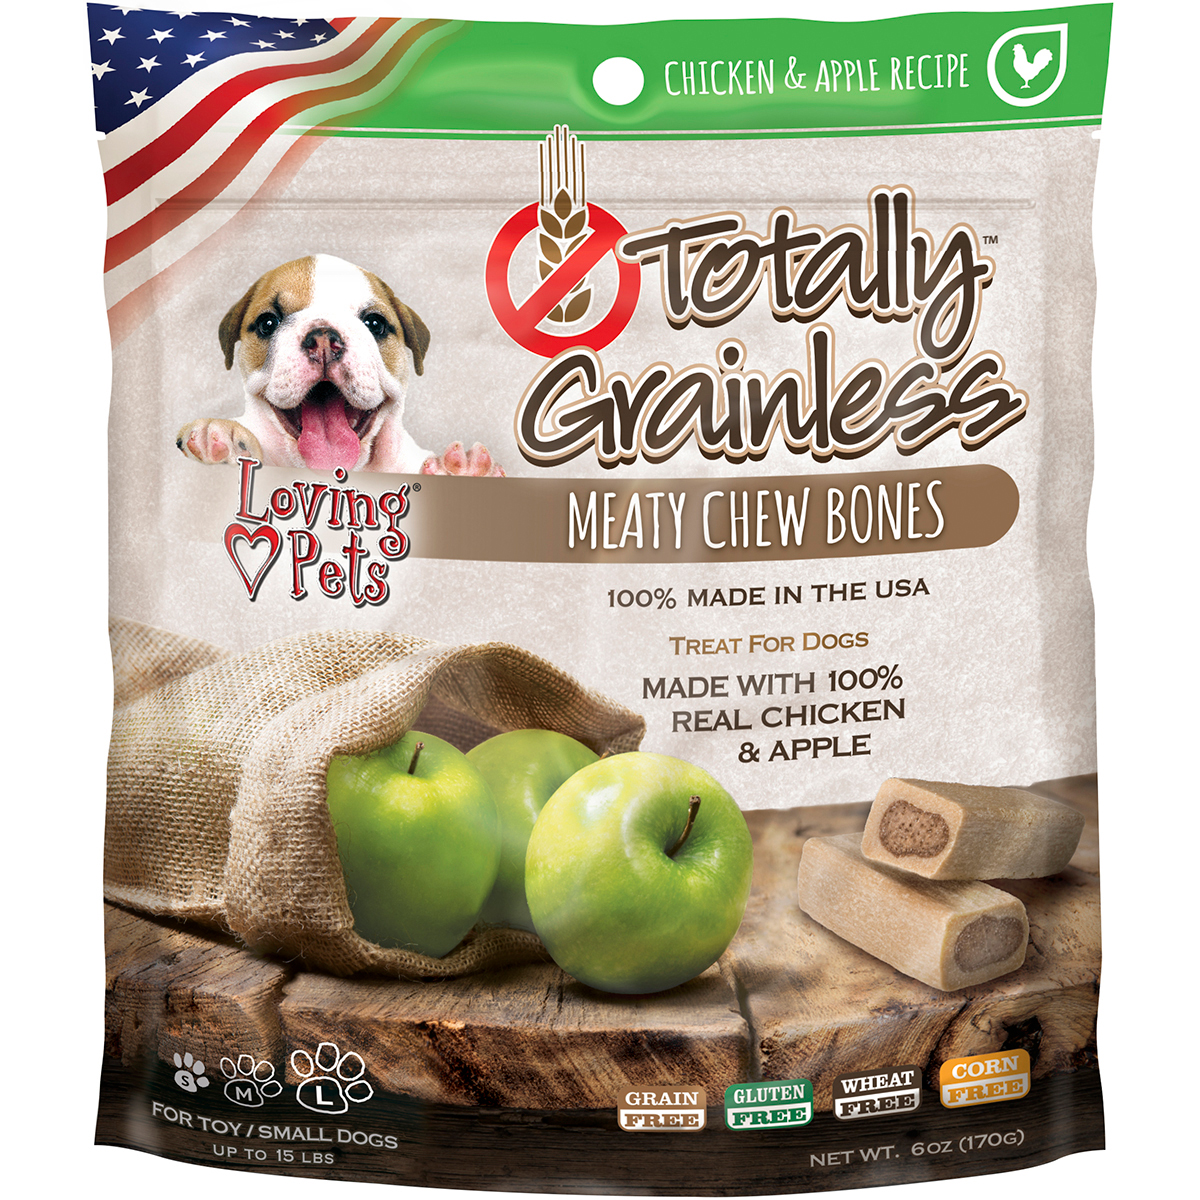 Lp5309 Totally Grainless Meaty Chewy Bones For Small Dogs Chicken & Apple - 6 Oz.